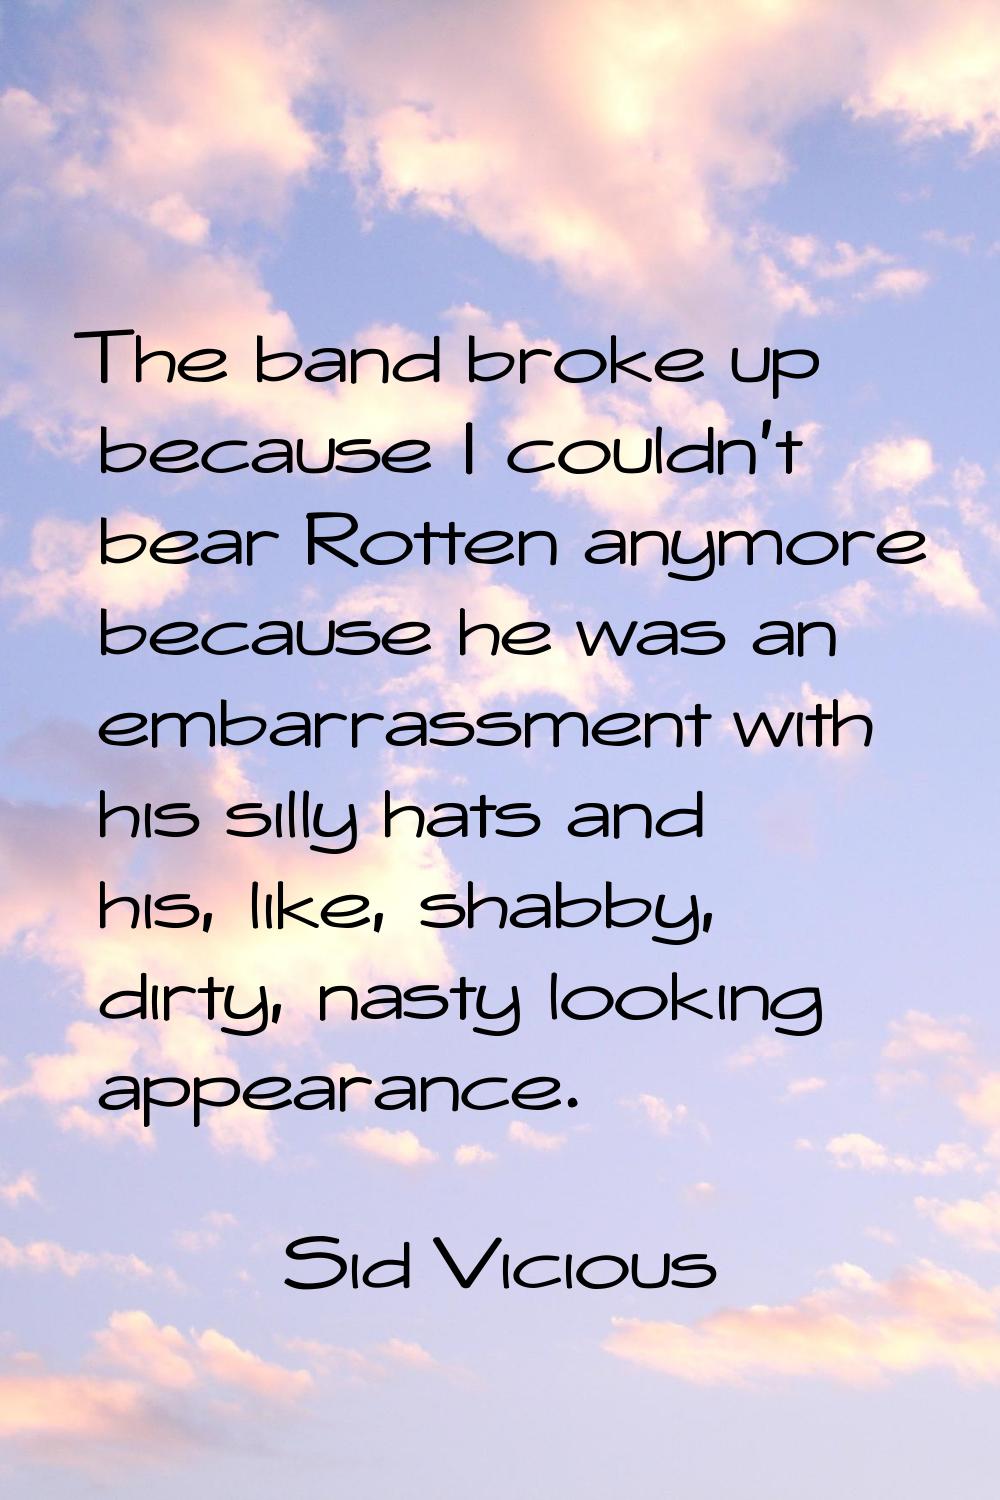 The band broke up because I couldn't bear Rotten anymore because he was an embarrassment with his s